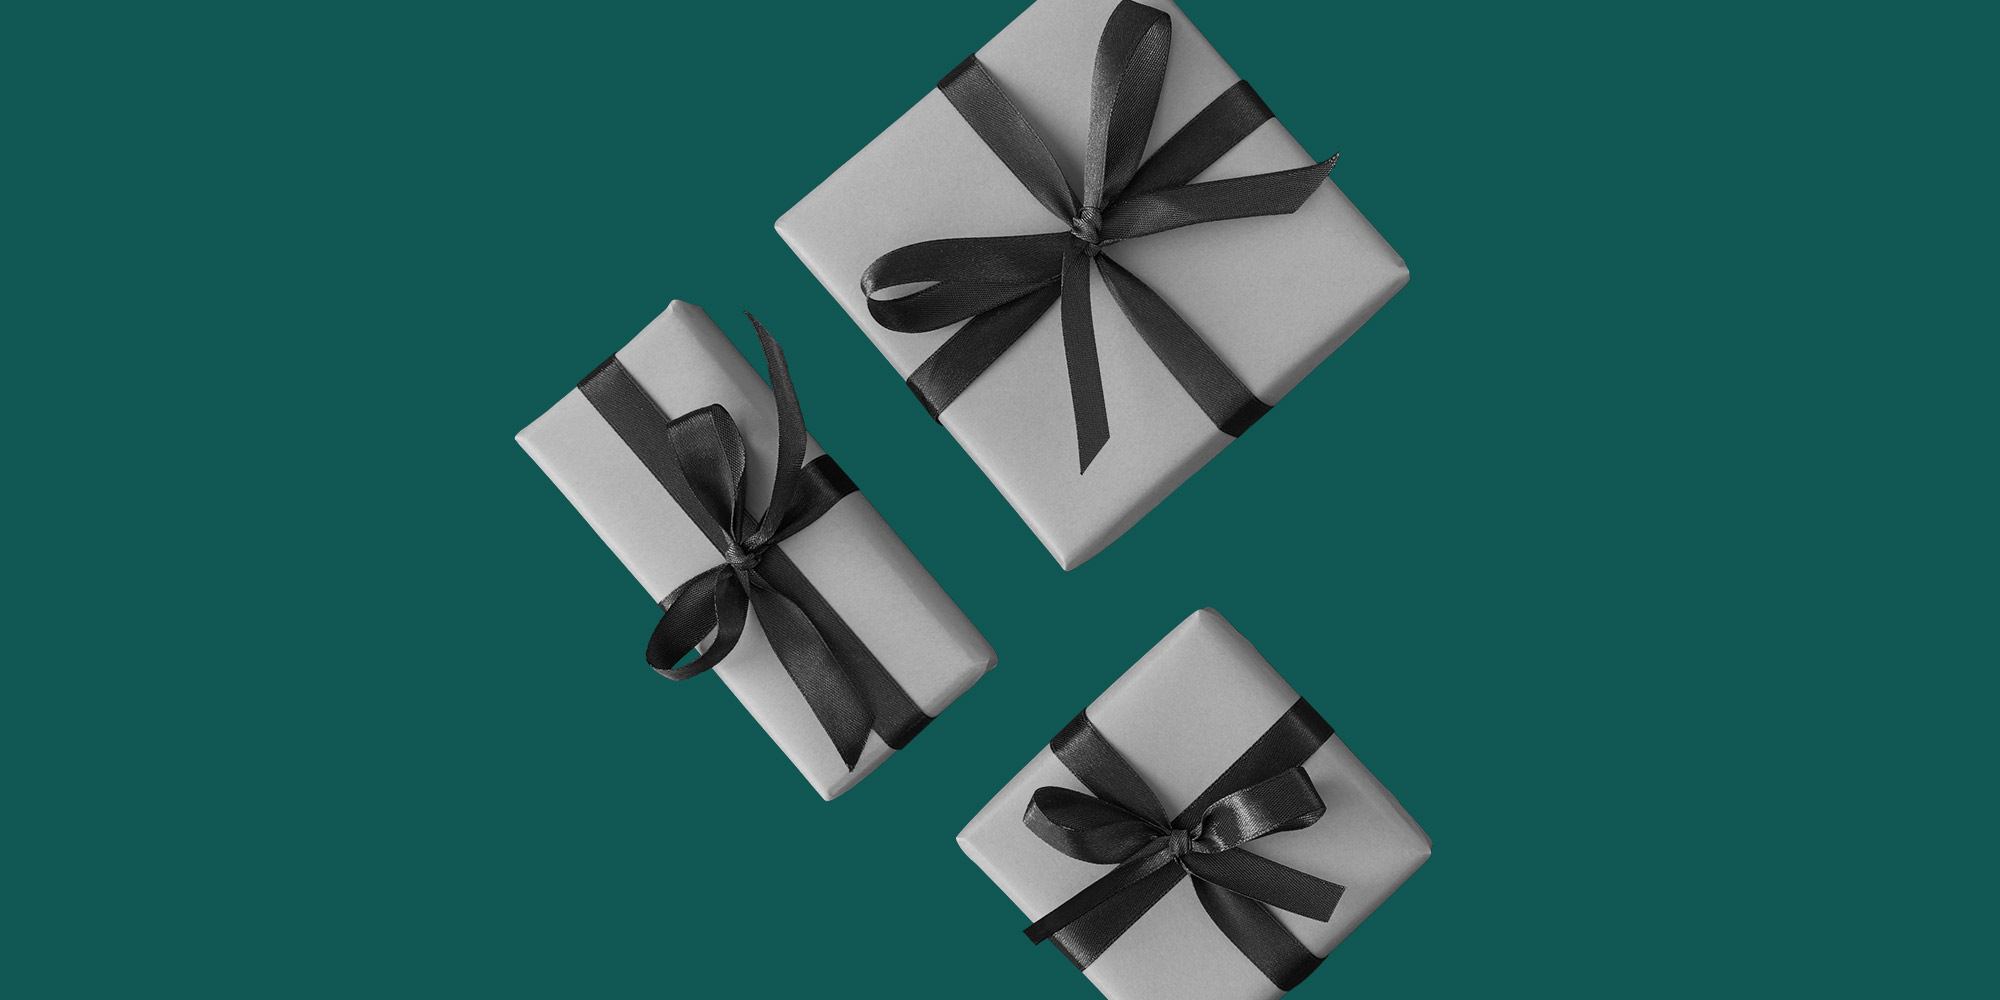 Wrapped packages with bows. Holiday Gift Guide for People in Addiction Recovery